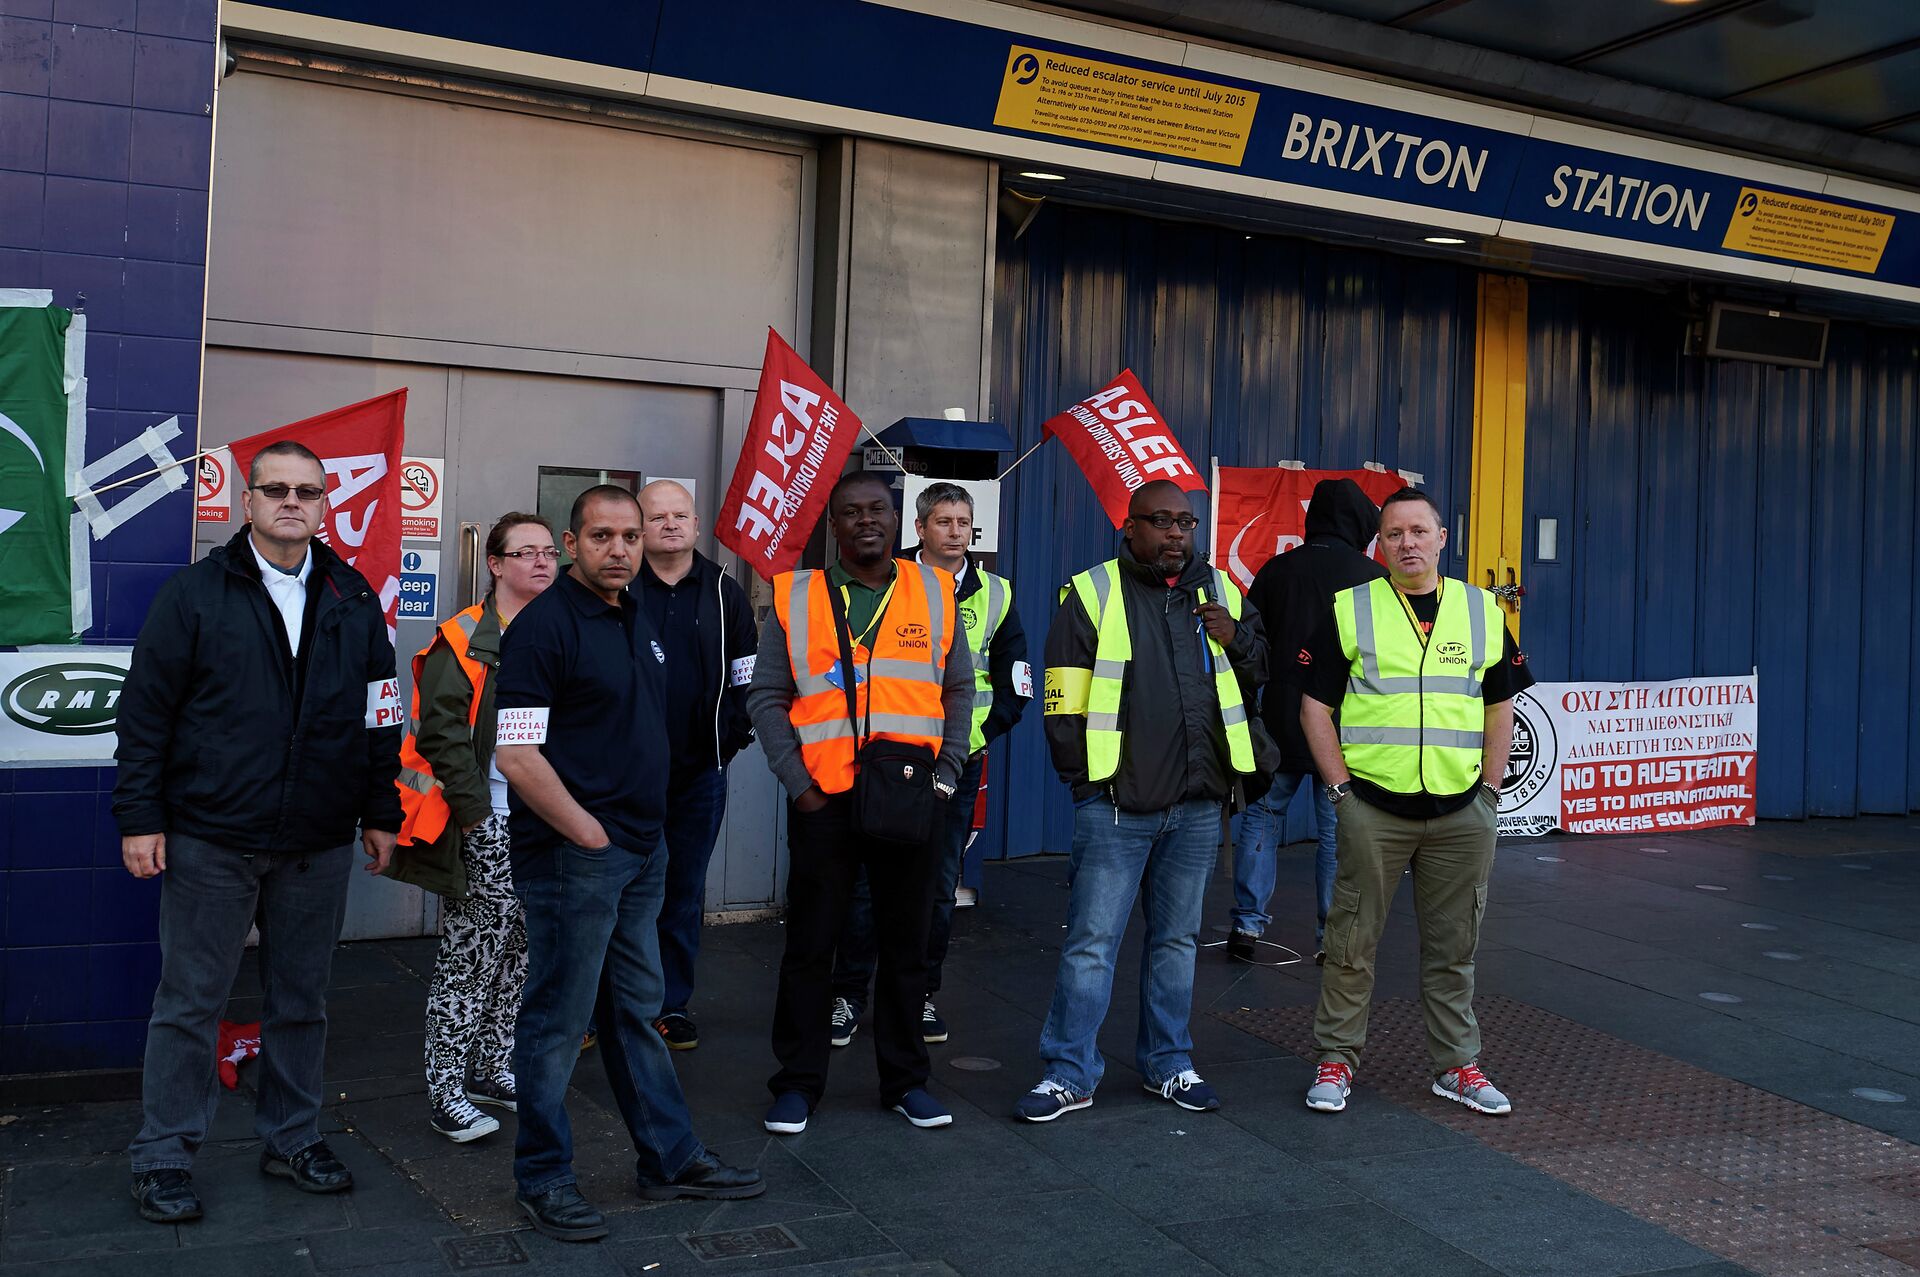 Protesters from the ASLEF and RMT unions stand at the locked gates of Brixton underground station during a tube strike in London on July 9, 2015 - Sputnik International, 1920, 21.06.2022